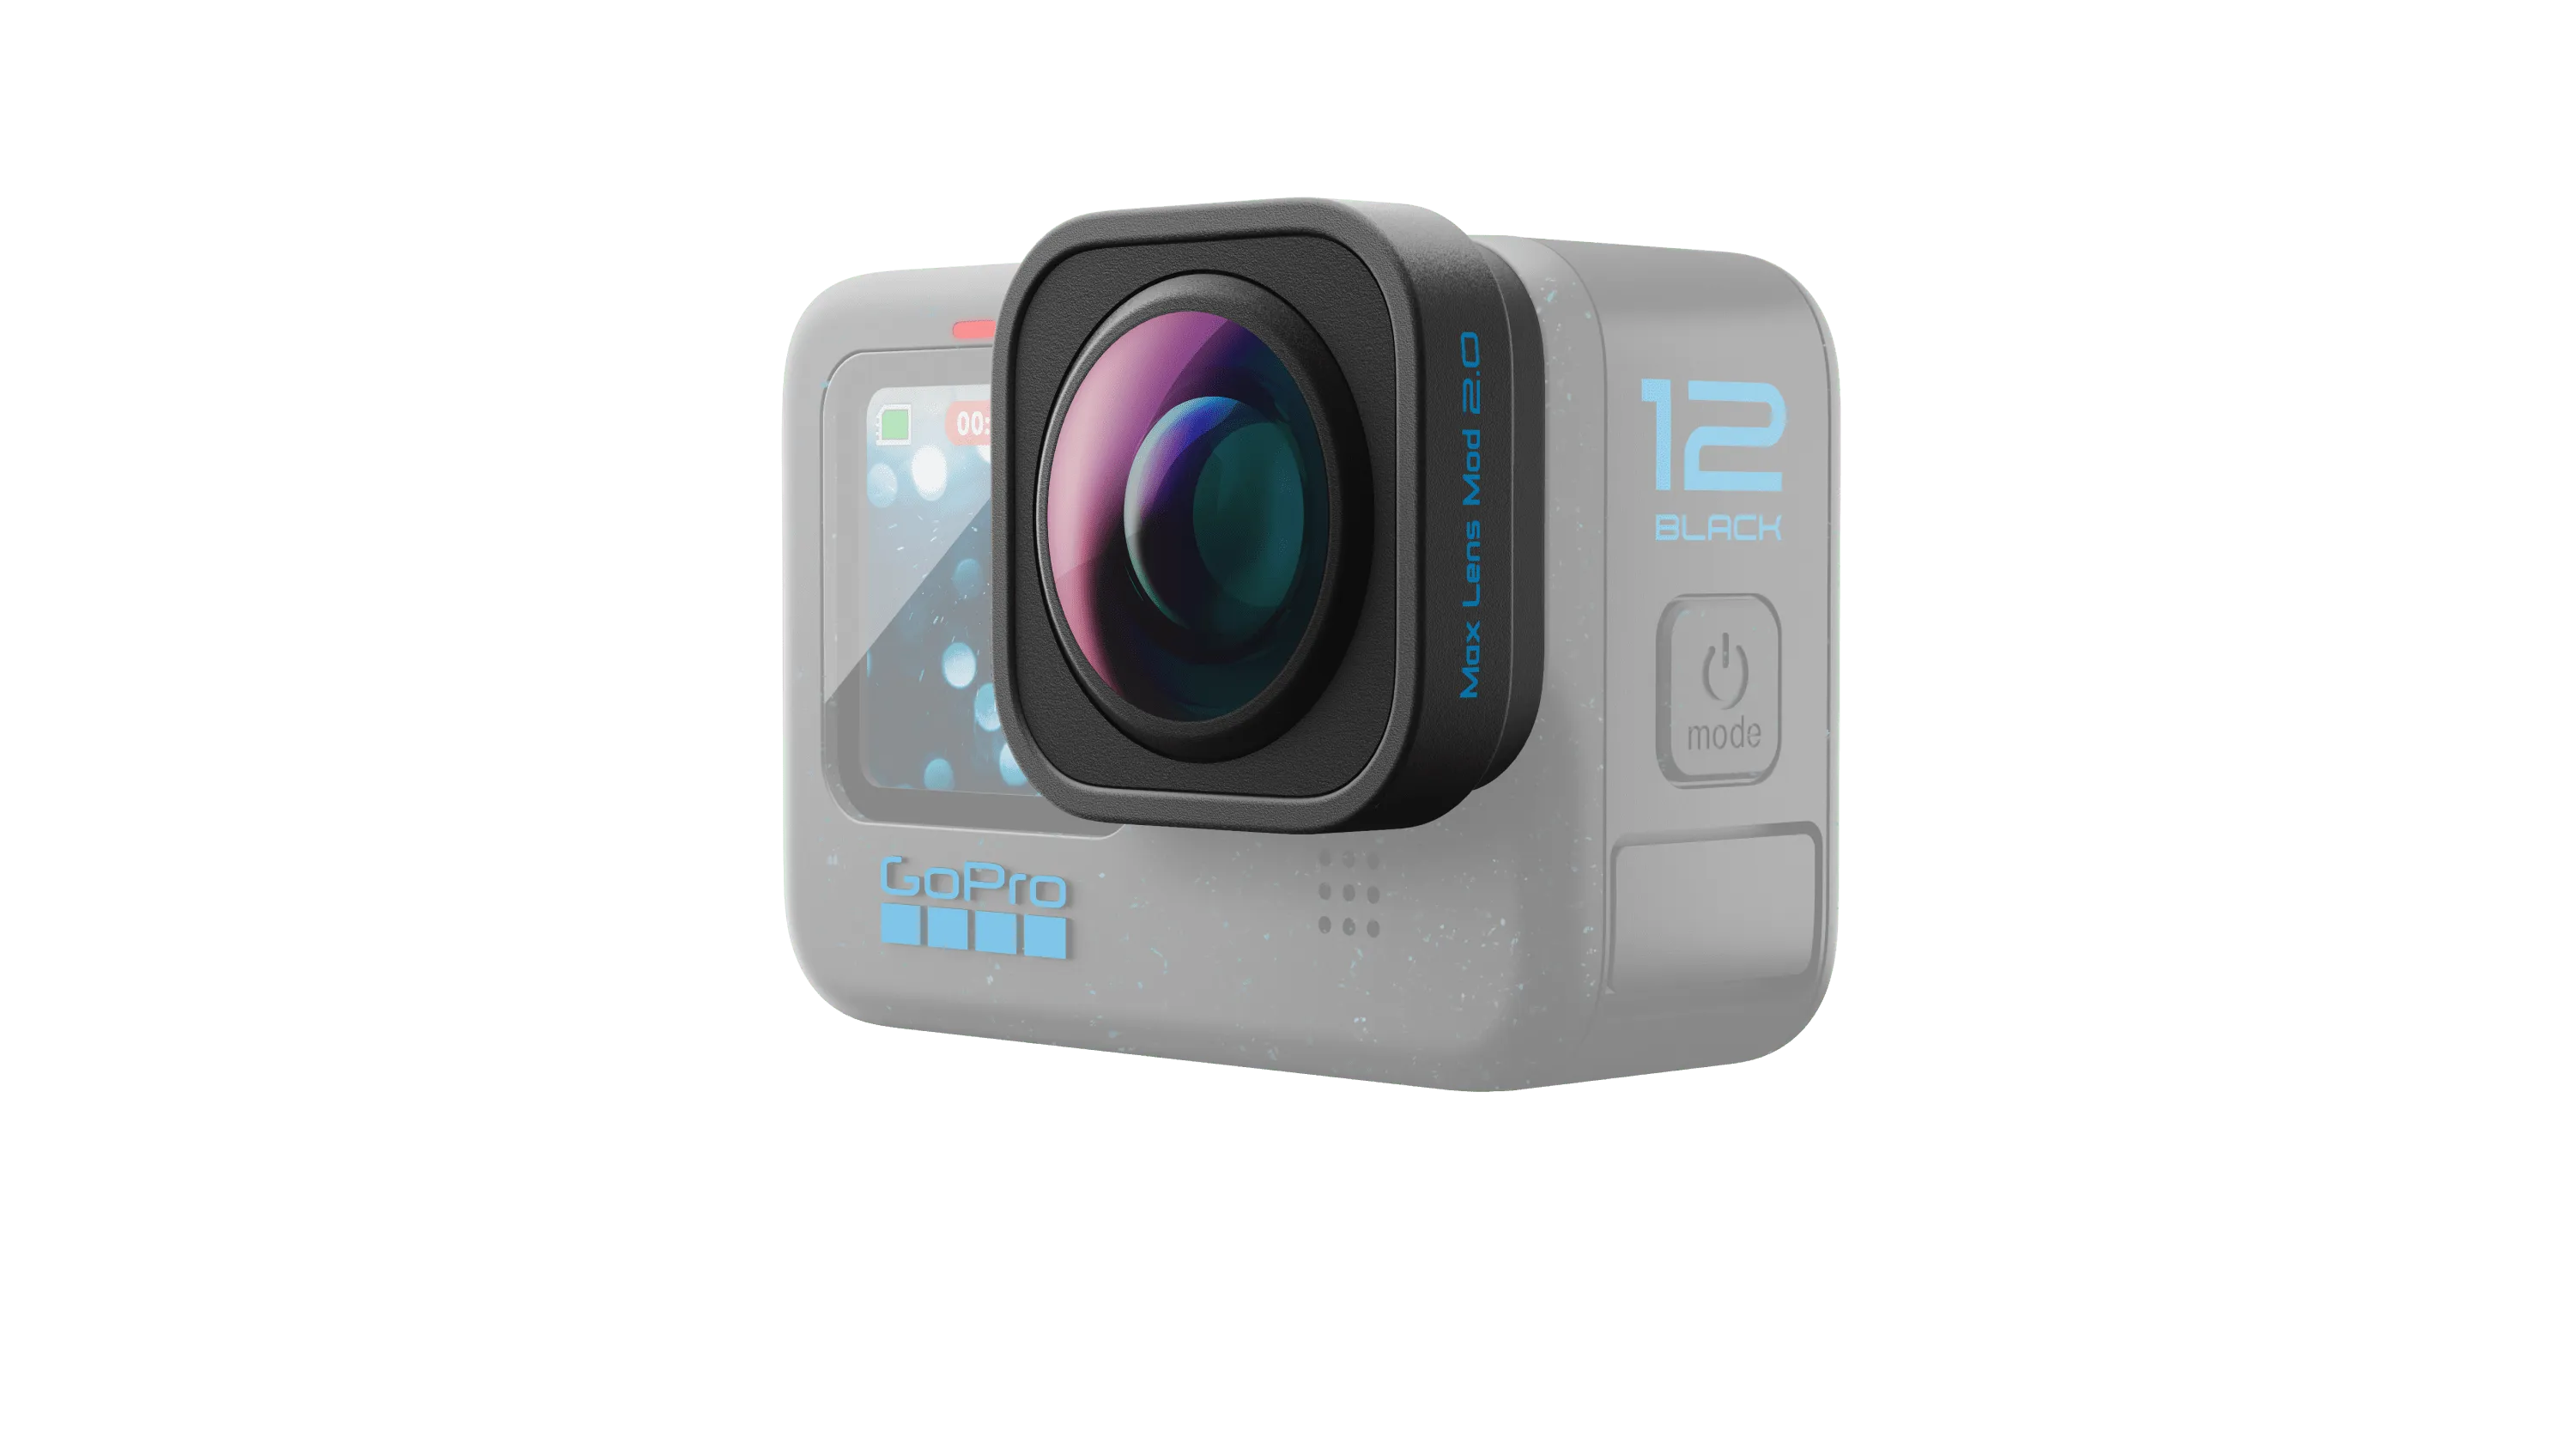 Max Lens Mod 2.0 HERO12 Black accessory enhancing camera field of view and stabilization.